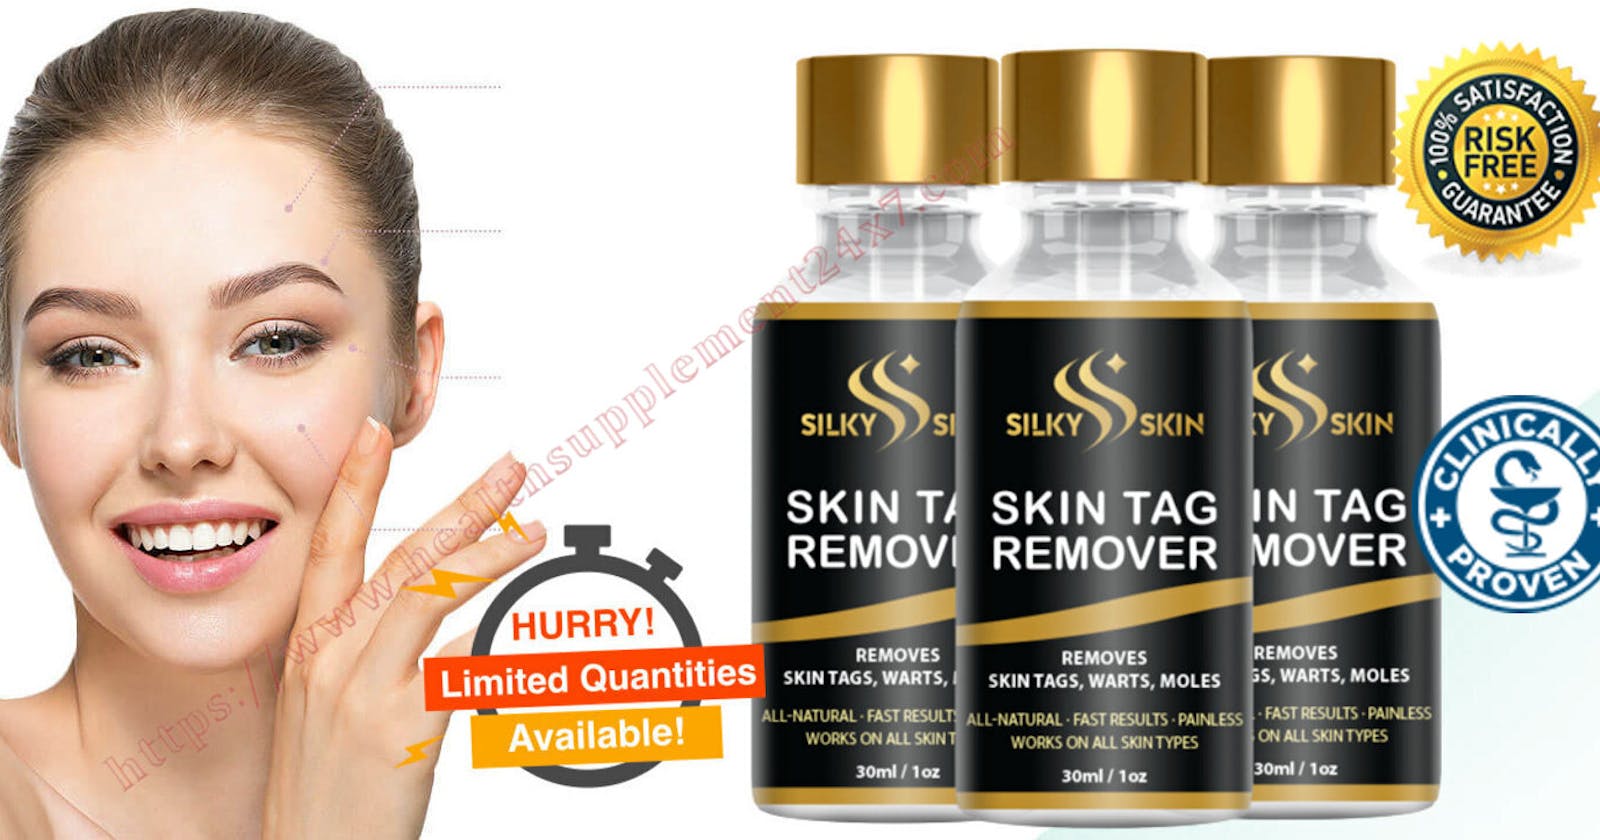 Silky Skin Tag Remover Serum Lets Rid All Types Of Skin Tags Moles Warts Within Few Weeks Guaranteed(REAL OR HOAX)